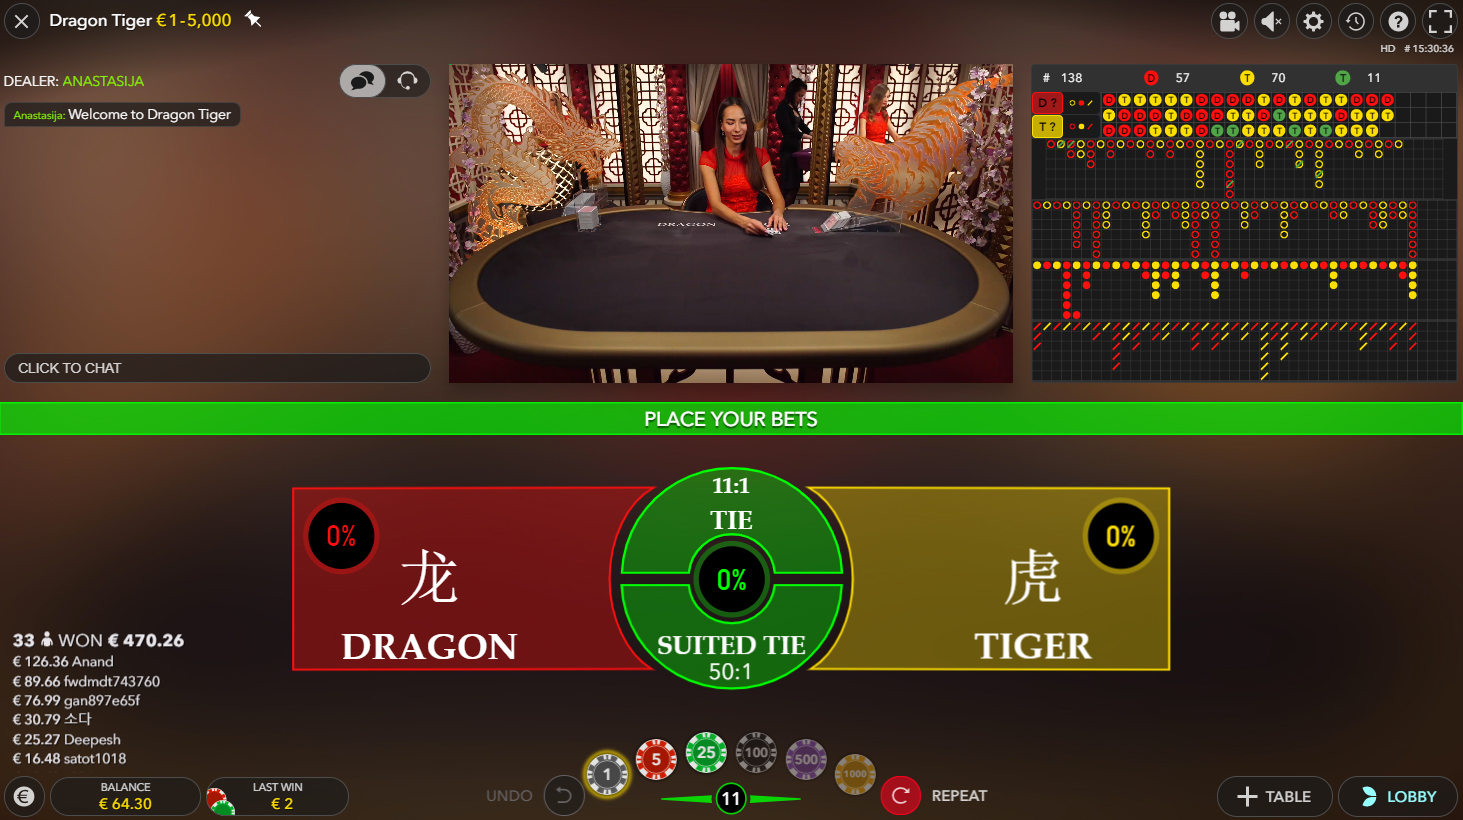 live roulette casinos - Relax, It's Play Time!